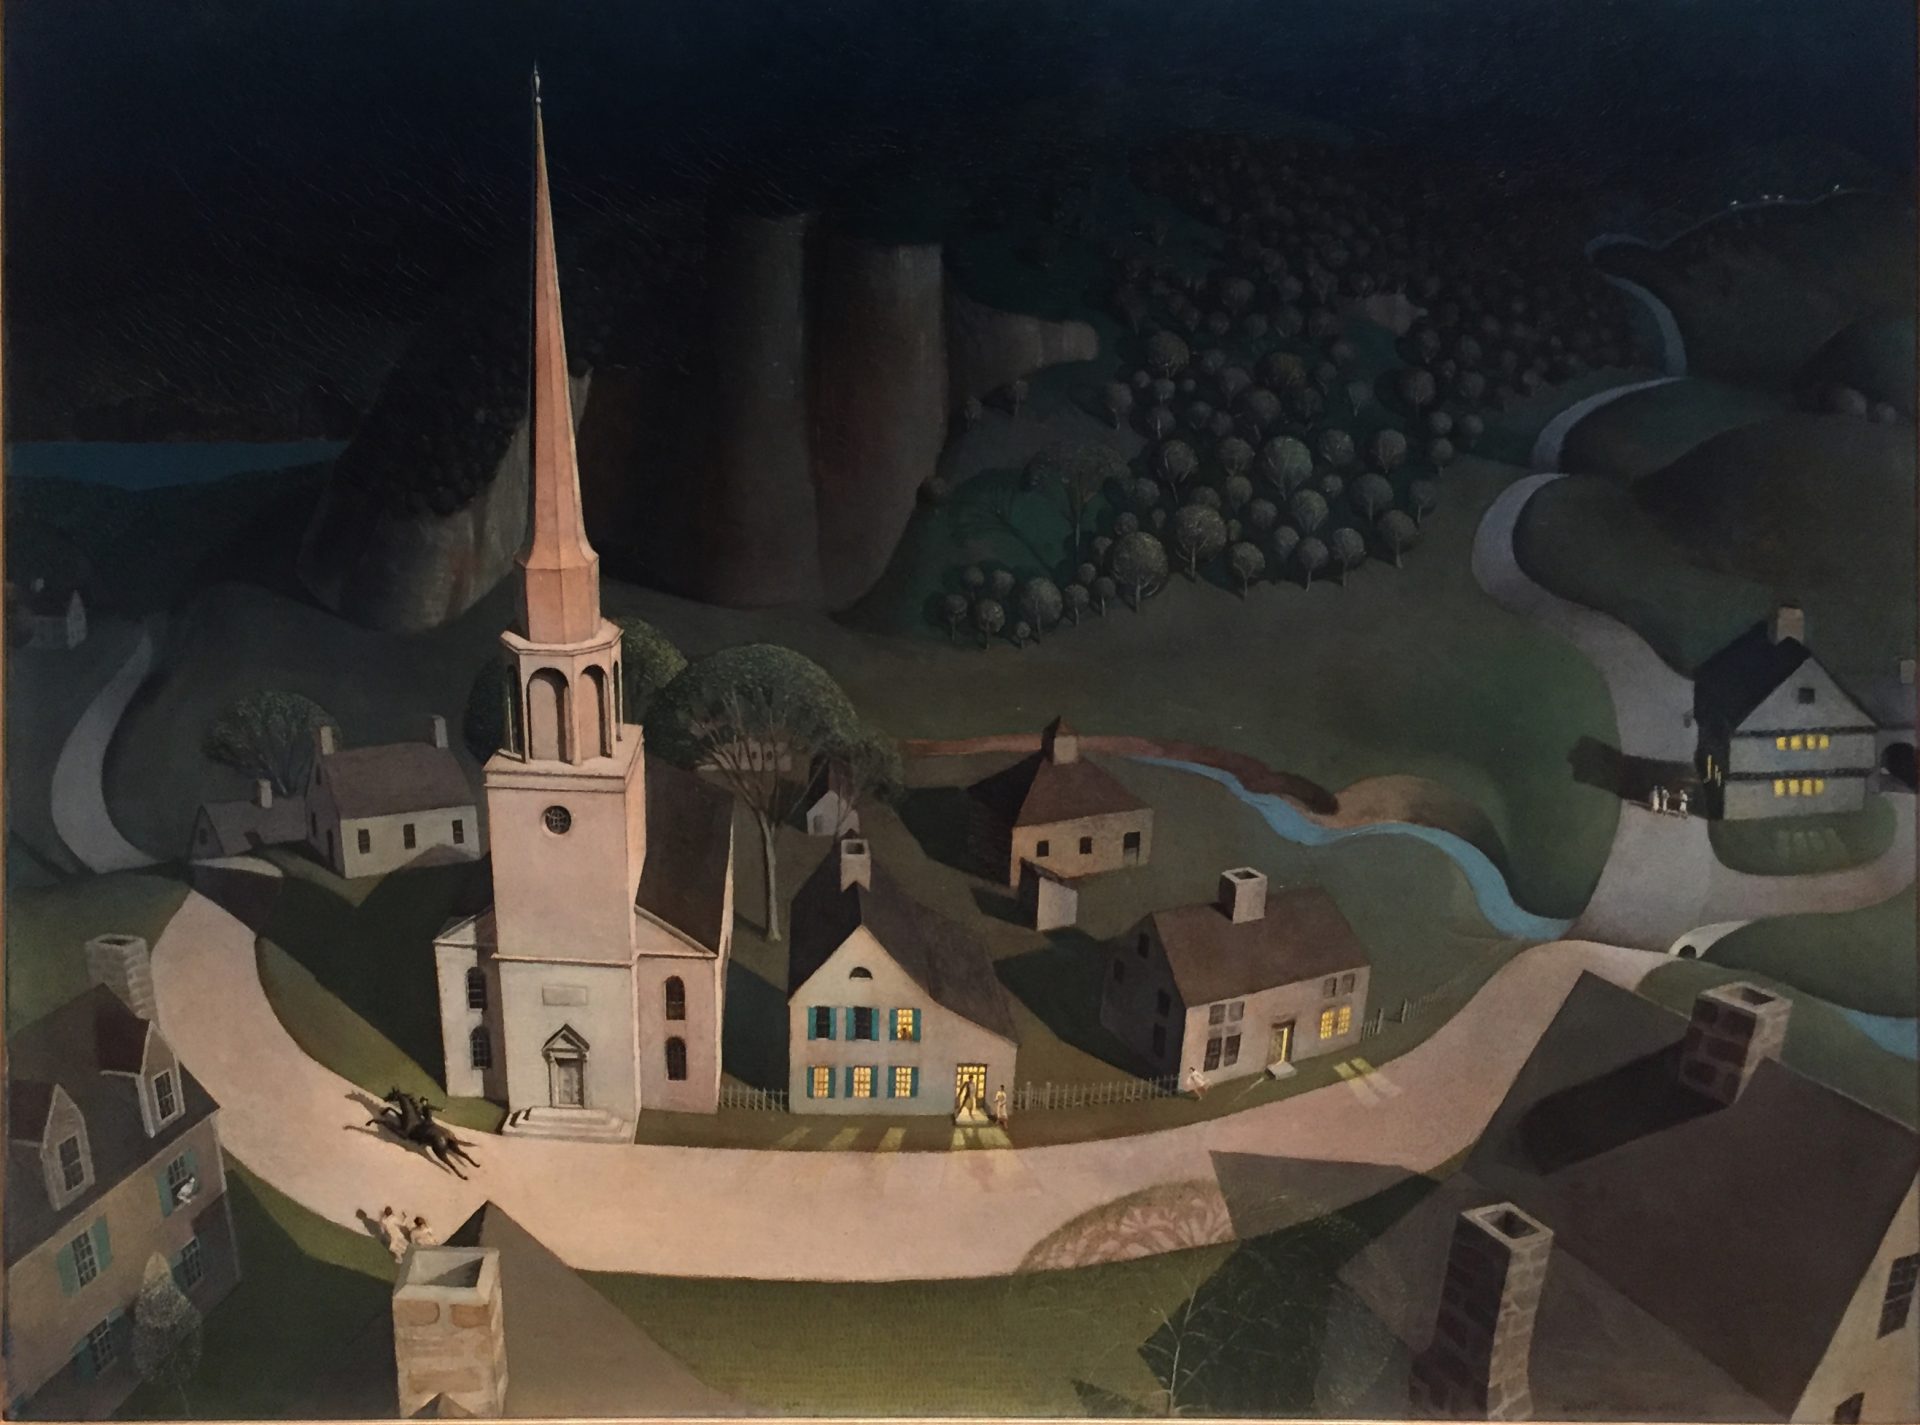 A dramatic aerial view of a small New England town at night, featuring Paul Revere on horseback galloping through the narrow, winding streets, presumably alerting the residents of the incoming British forces. The houses and streets are simplified and geometrical, almost toy-like, rendered in a rich palette of blues and greens under the moonlight. The lighted windows of the houses punctuate the scene with warm, inviting spots of yellow. The church in the center of the town is a significant focal point. The painting stylizes and romanticizes the historic event with a sense of whimsy and folklore.